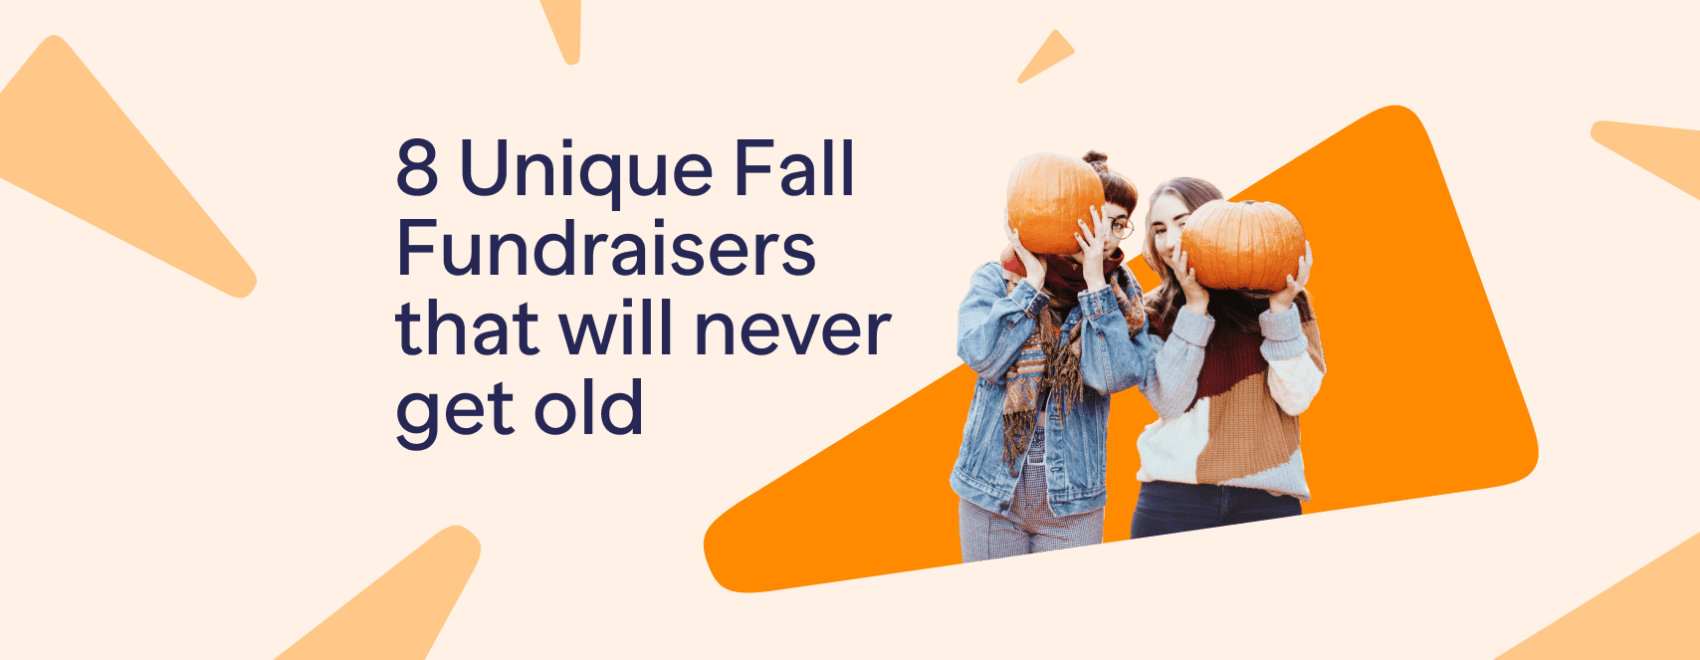 fall fundraising ideas article feature